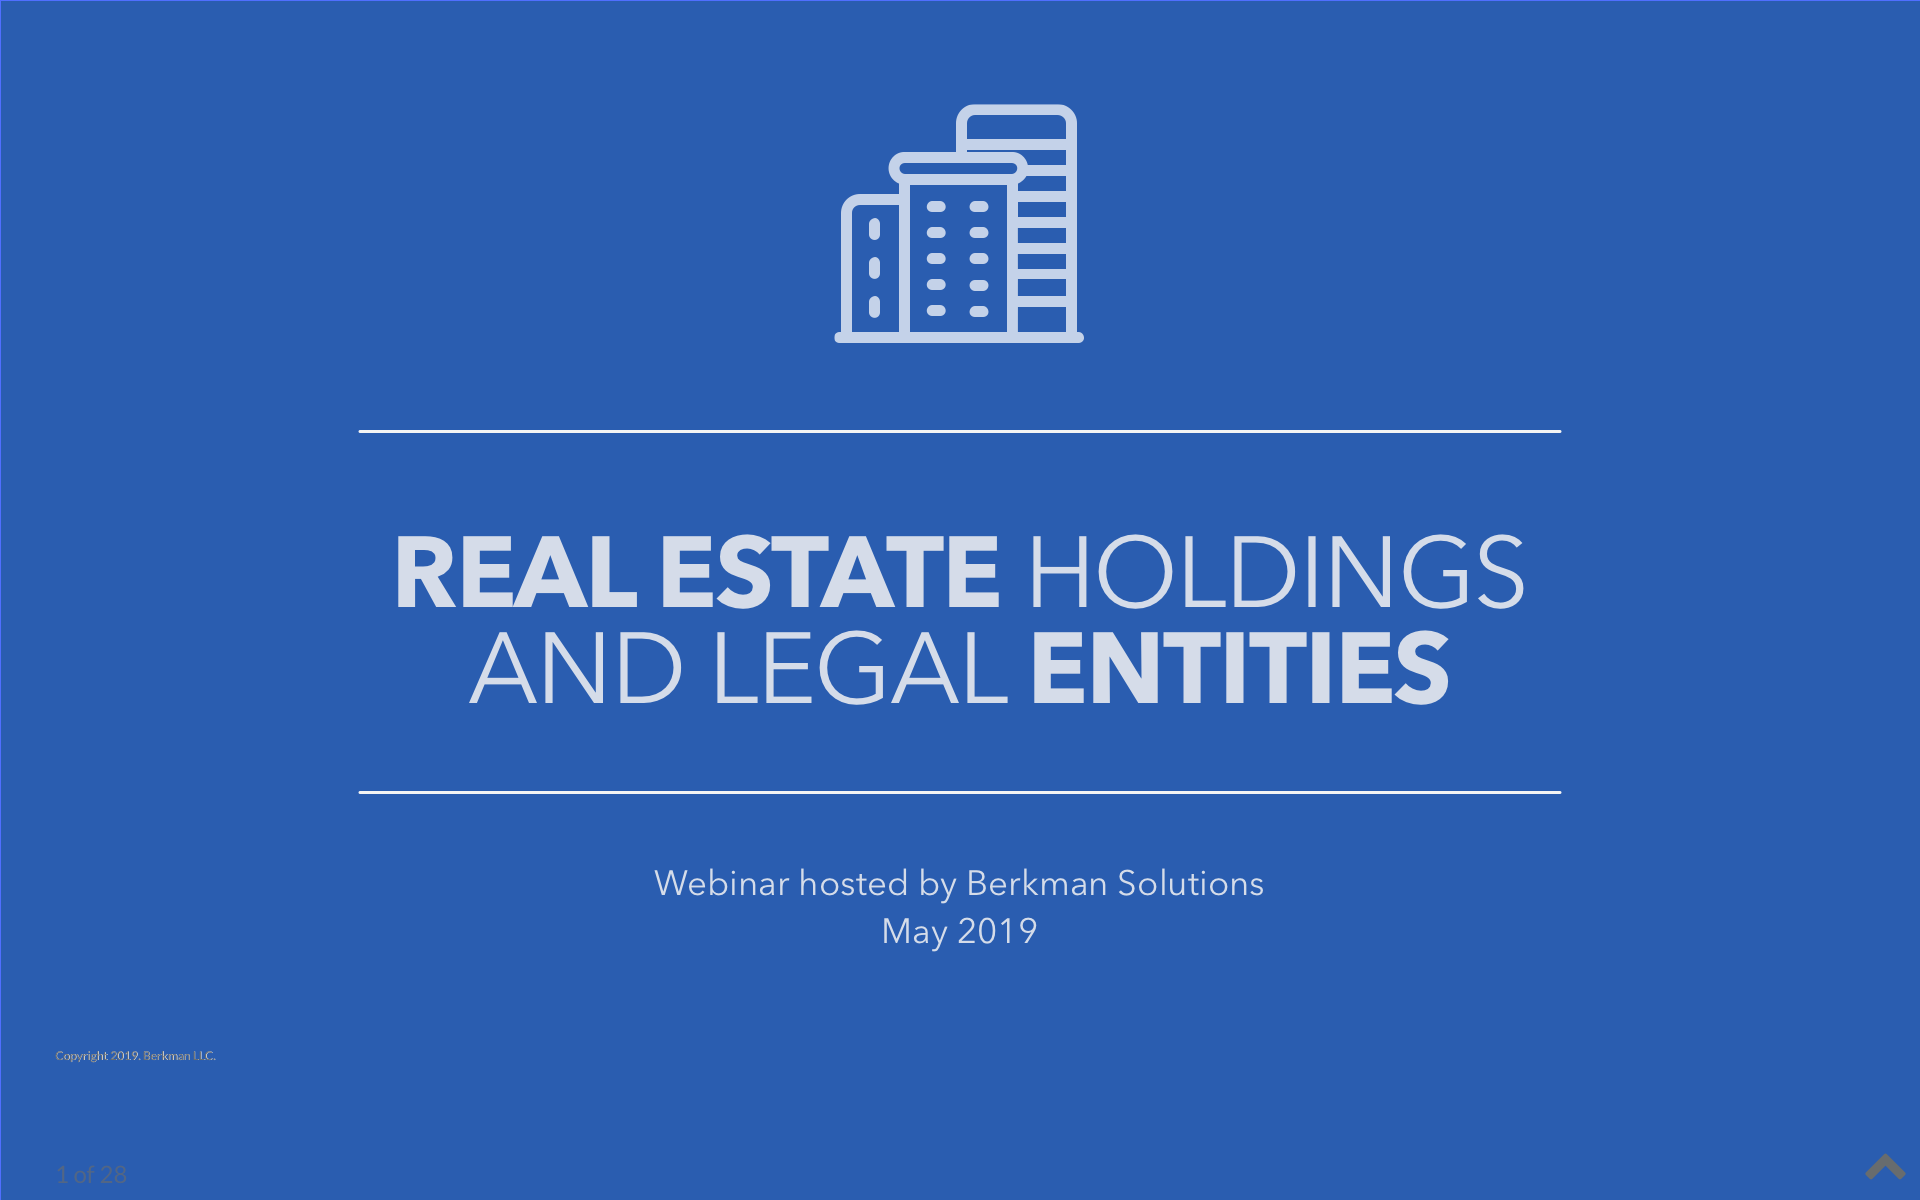 A Better View for Real Estate Holdings and Legal Entities